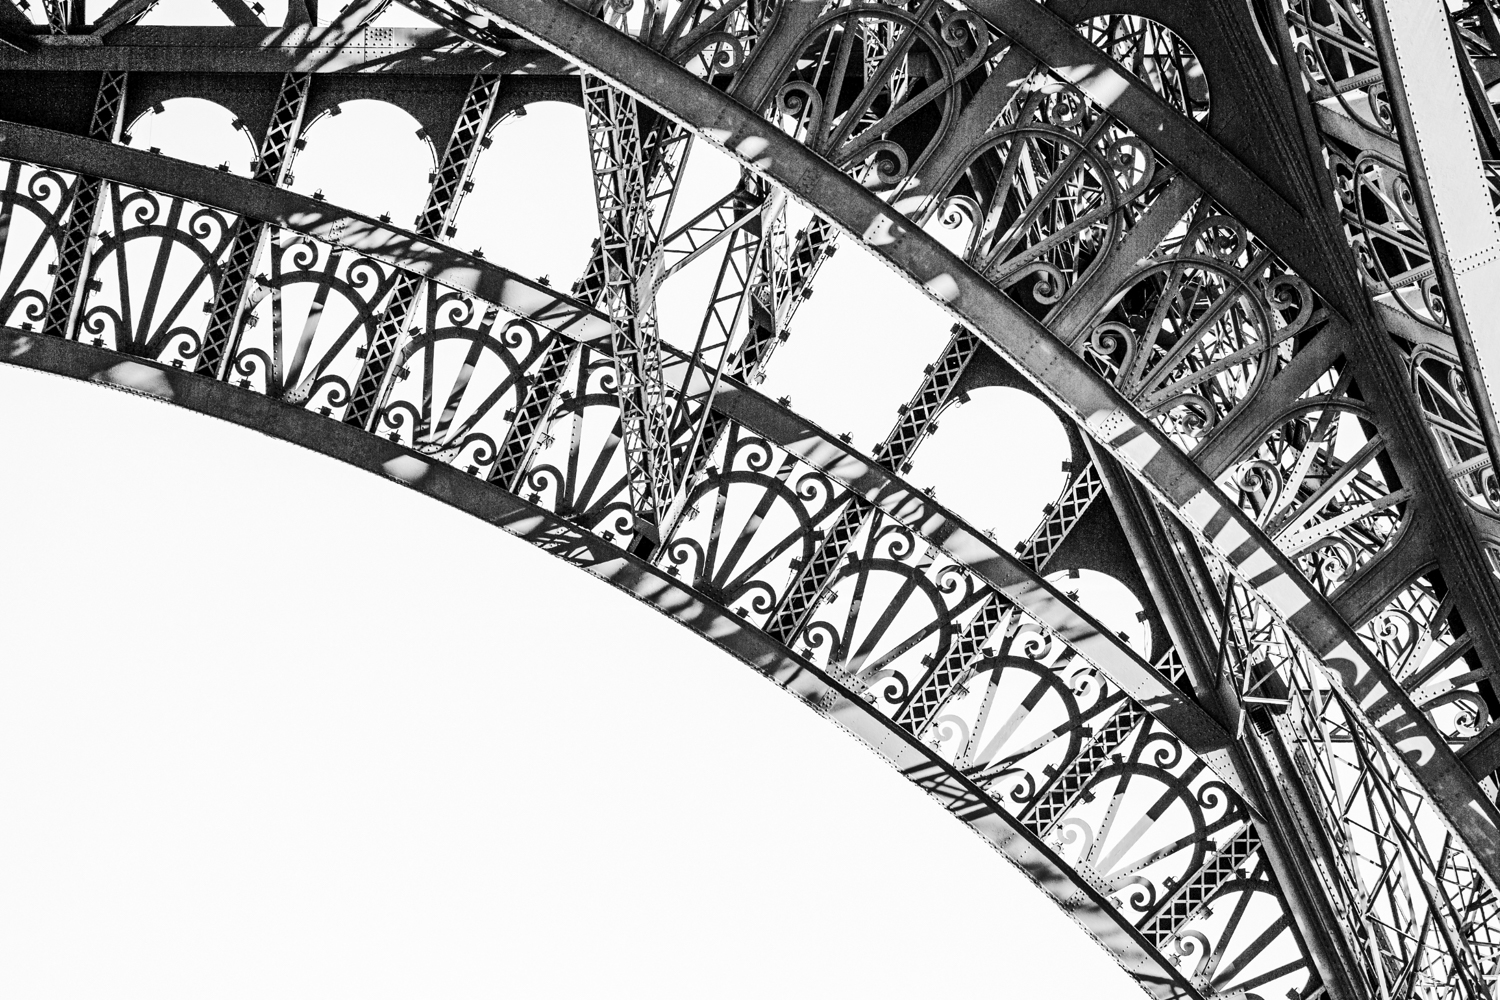 Copy of Copy of Eiffel Tower, Section of Arch